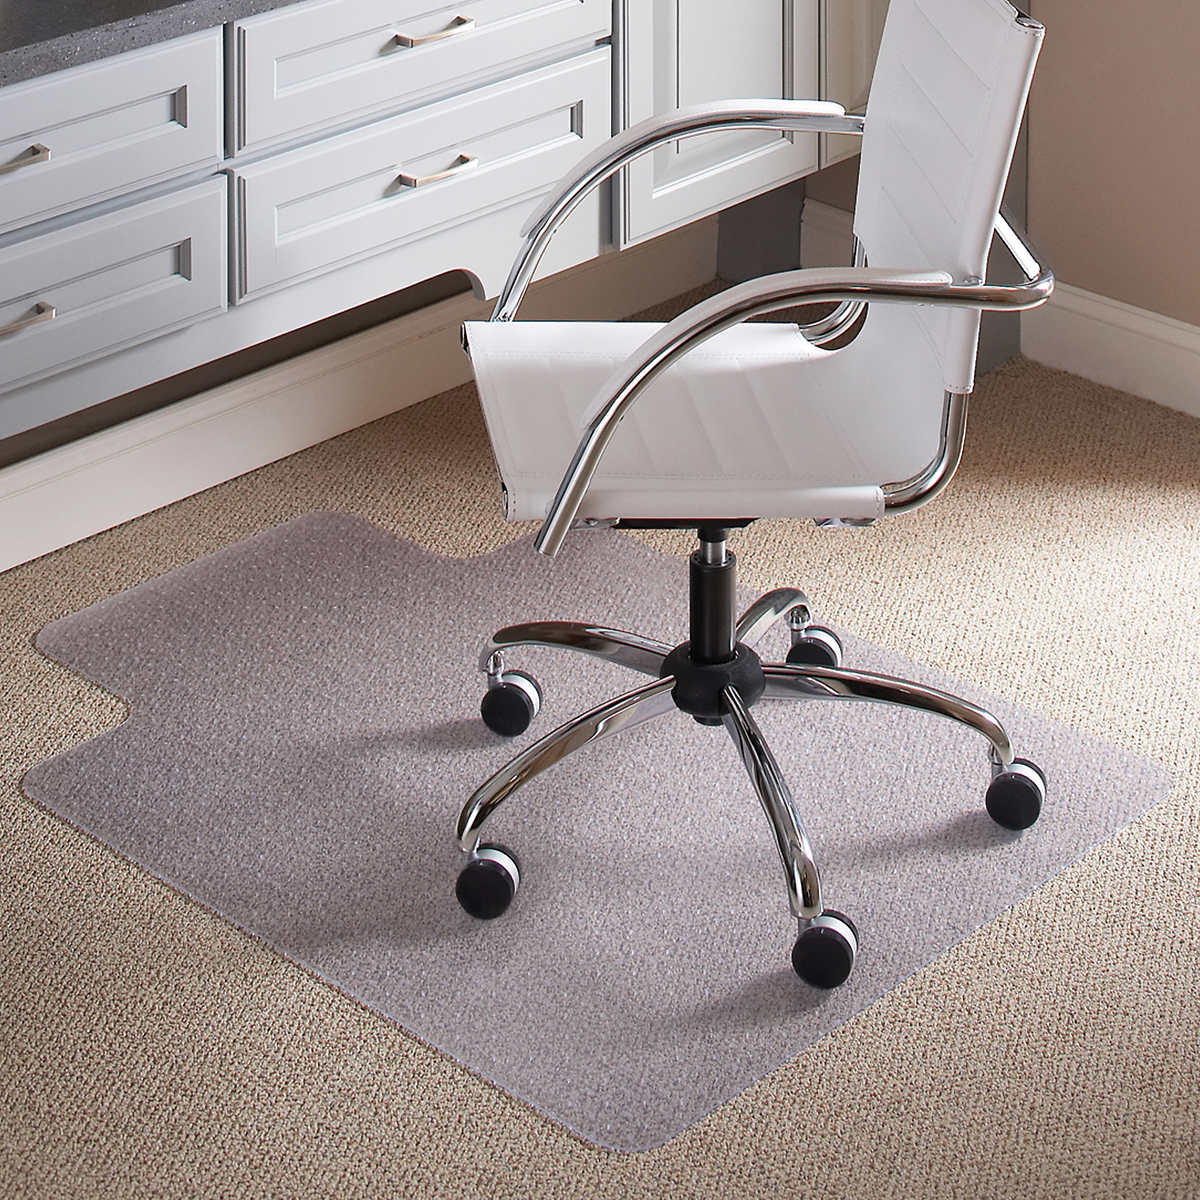 Heavy Duty Carpet Chair Mat Thick and Sturdy Transparent Chair mat for Low Pile Carpets Size 36 X 48 with Lip